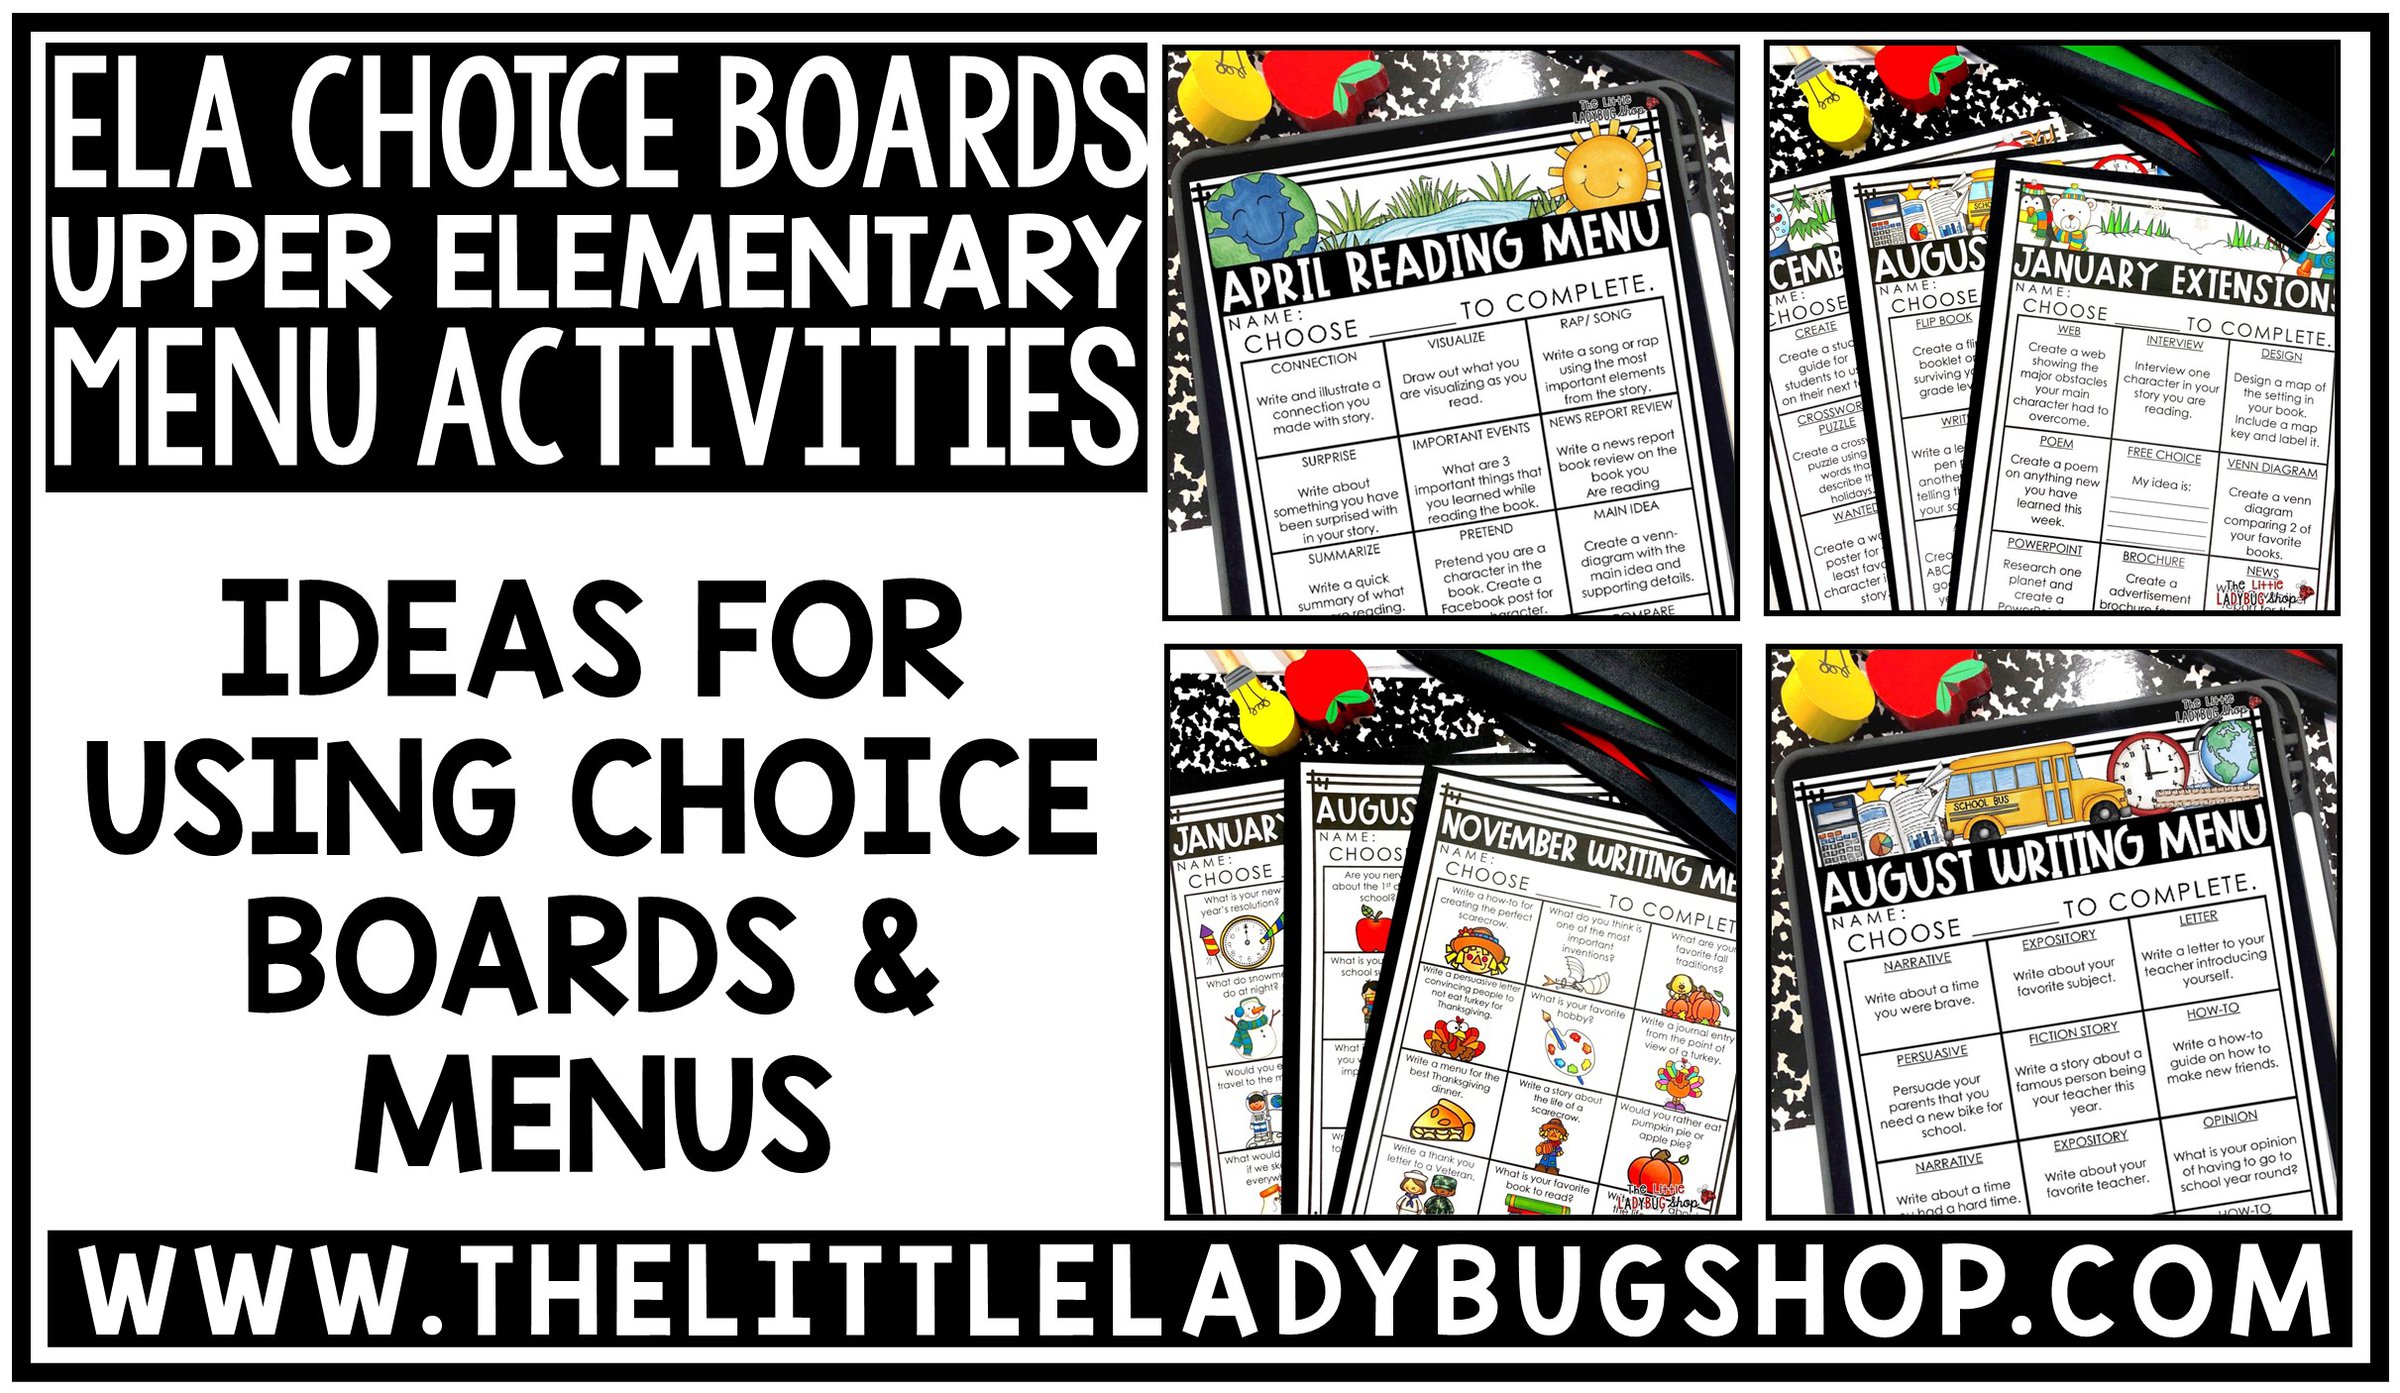 ELA Reading and Writing Choice Boards & Menus in the Upper Elementary Classroom